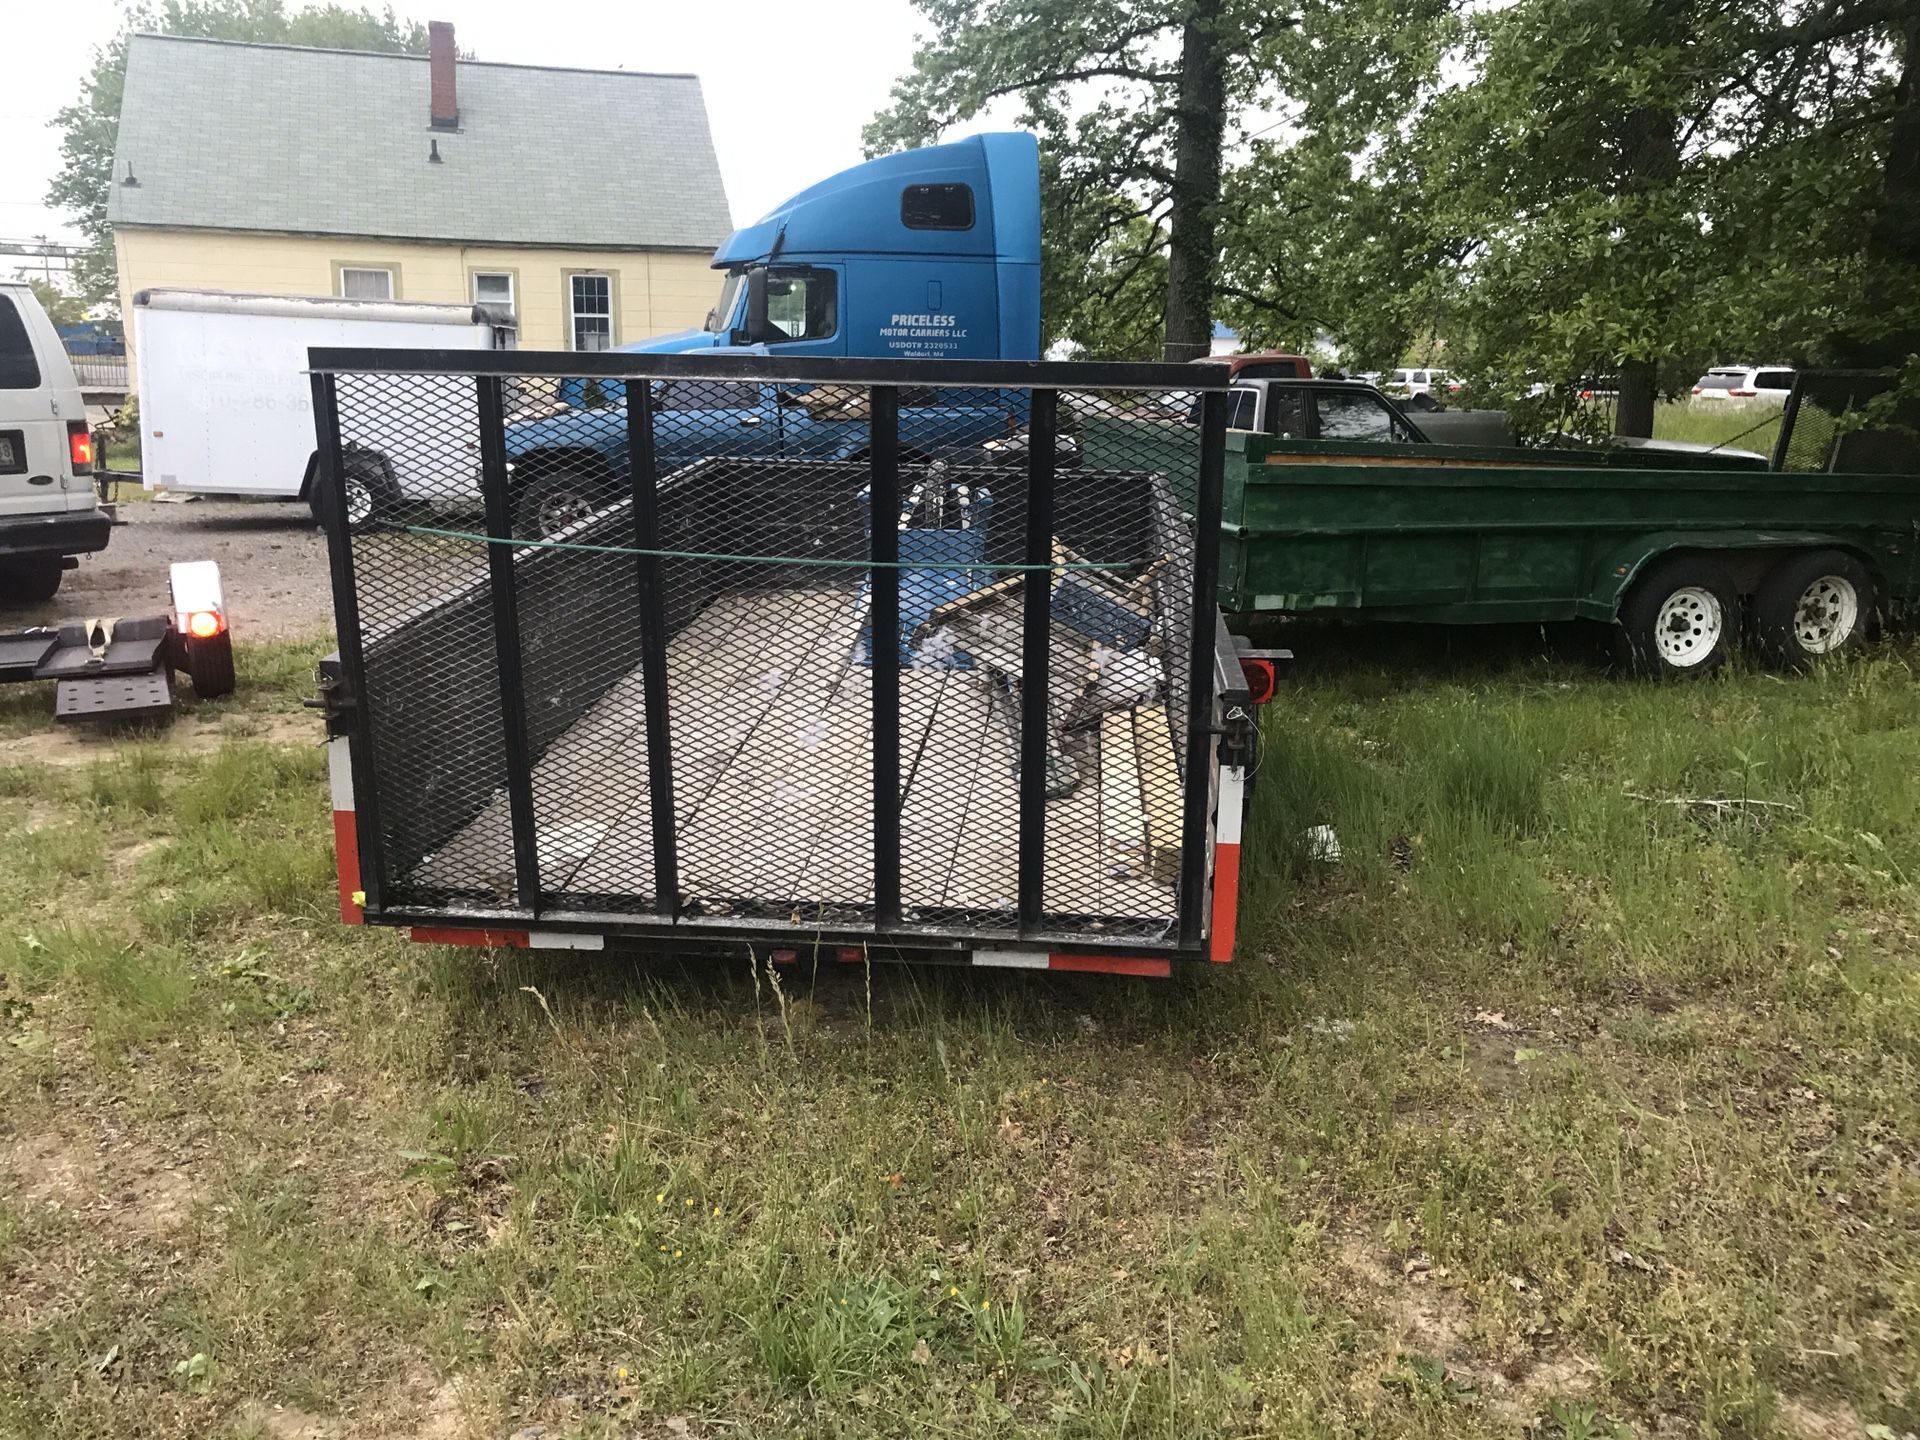 Trailer for sale good condition 6x12.